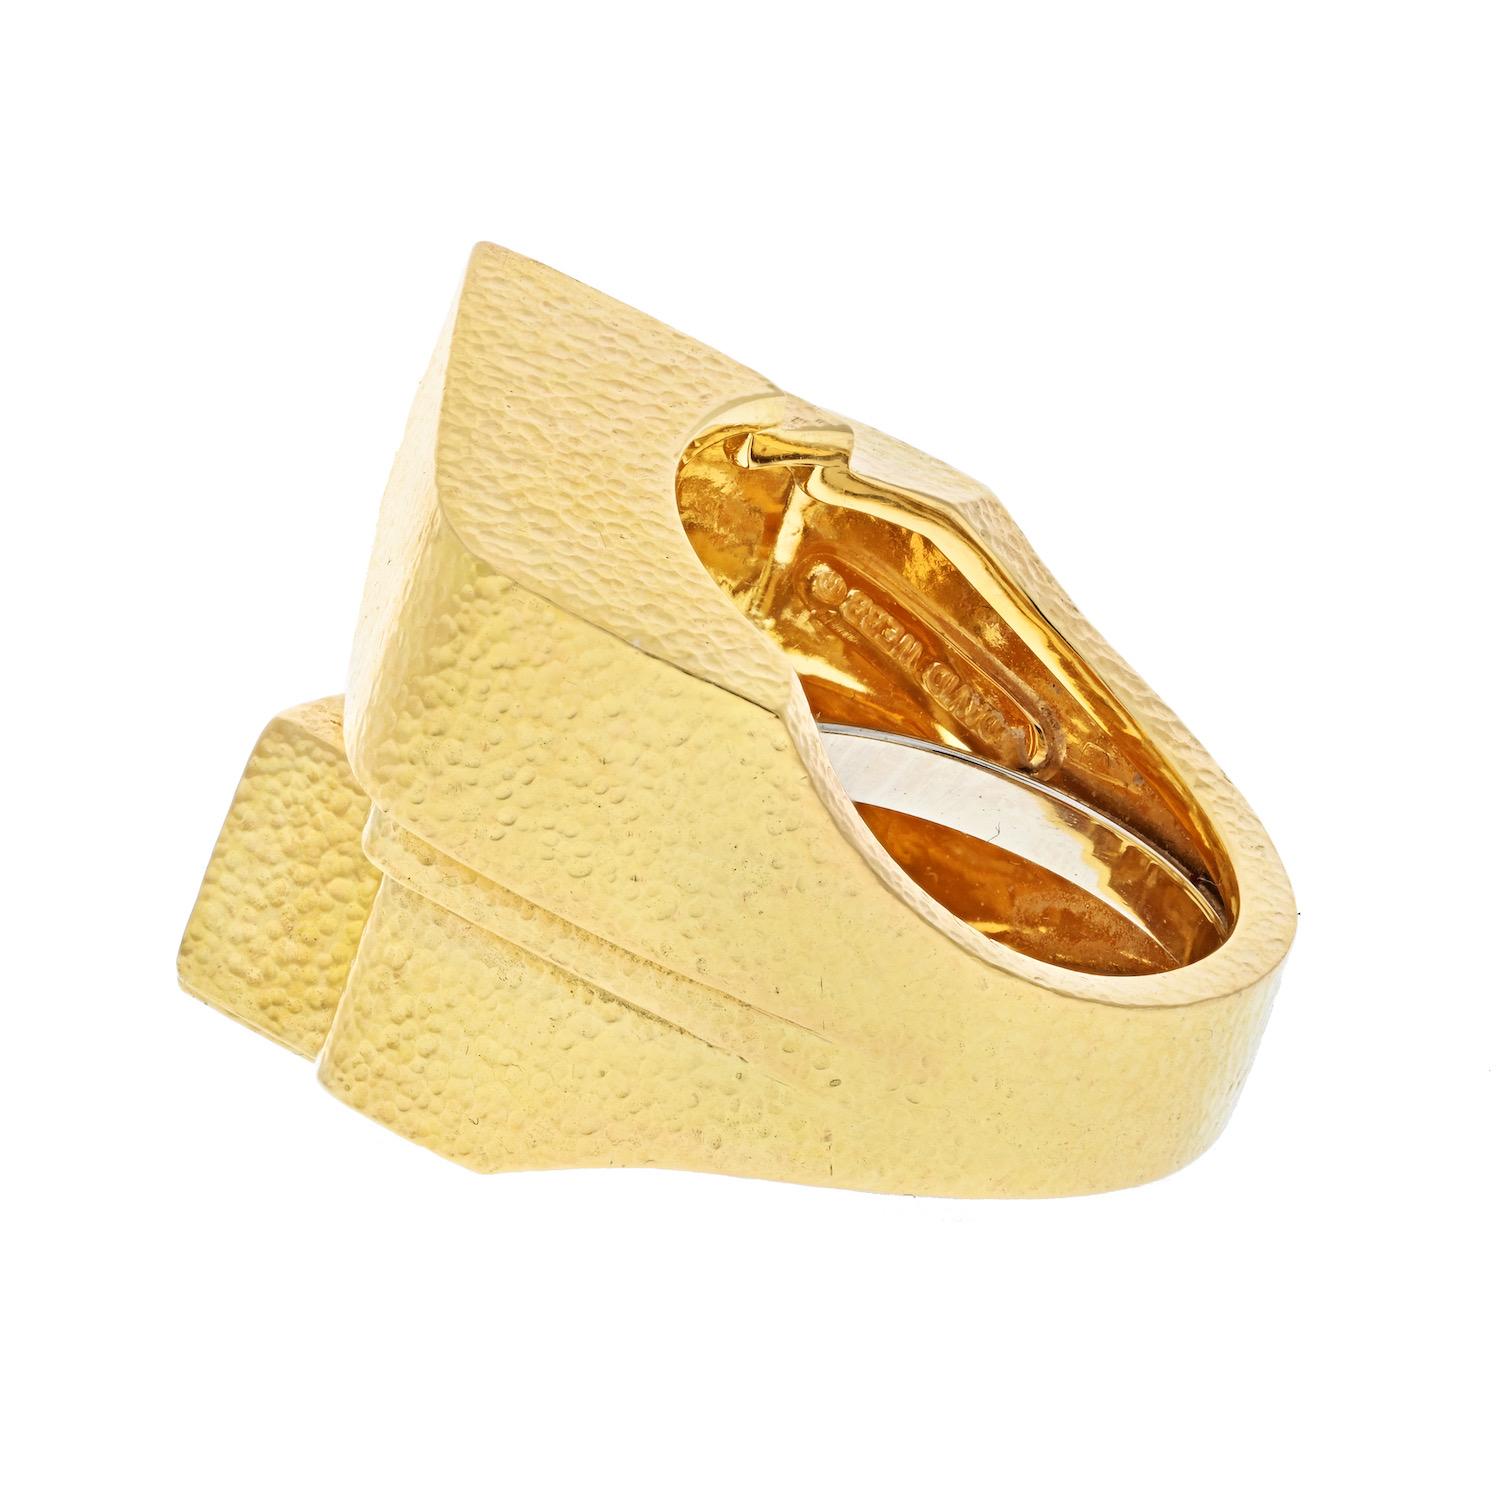 This is an iconic ring called Ski Slope by David Webb. We love the idea of a gold statement ring, no extra bells just a smooth surface with hammered finish. It is clean and striking, but above all this creative gold statement ring is suitable for